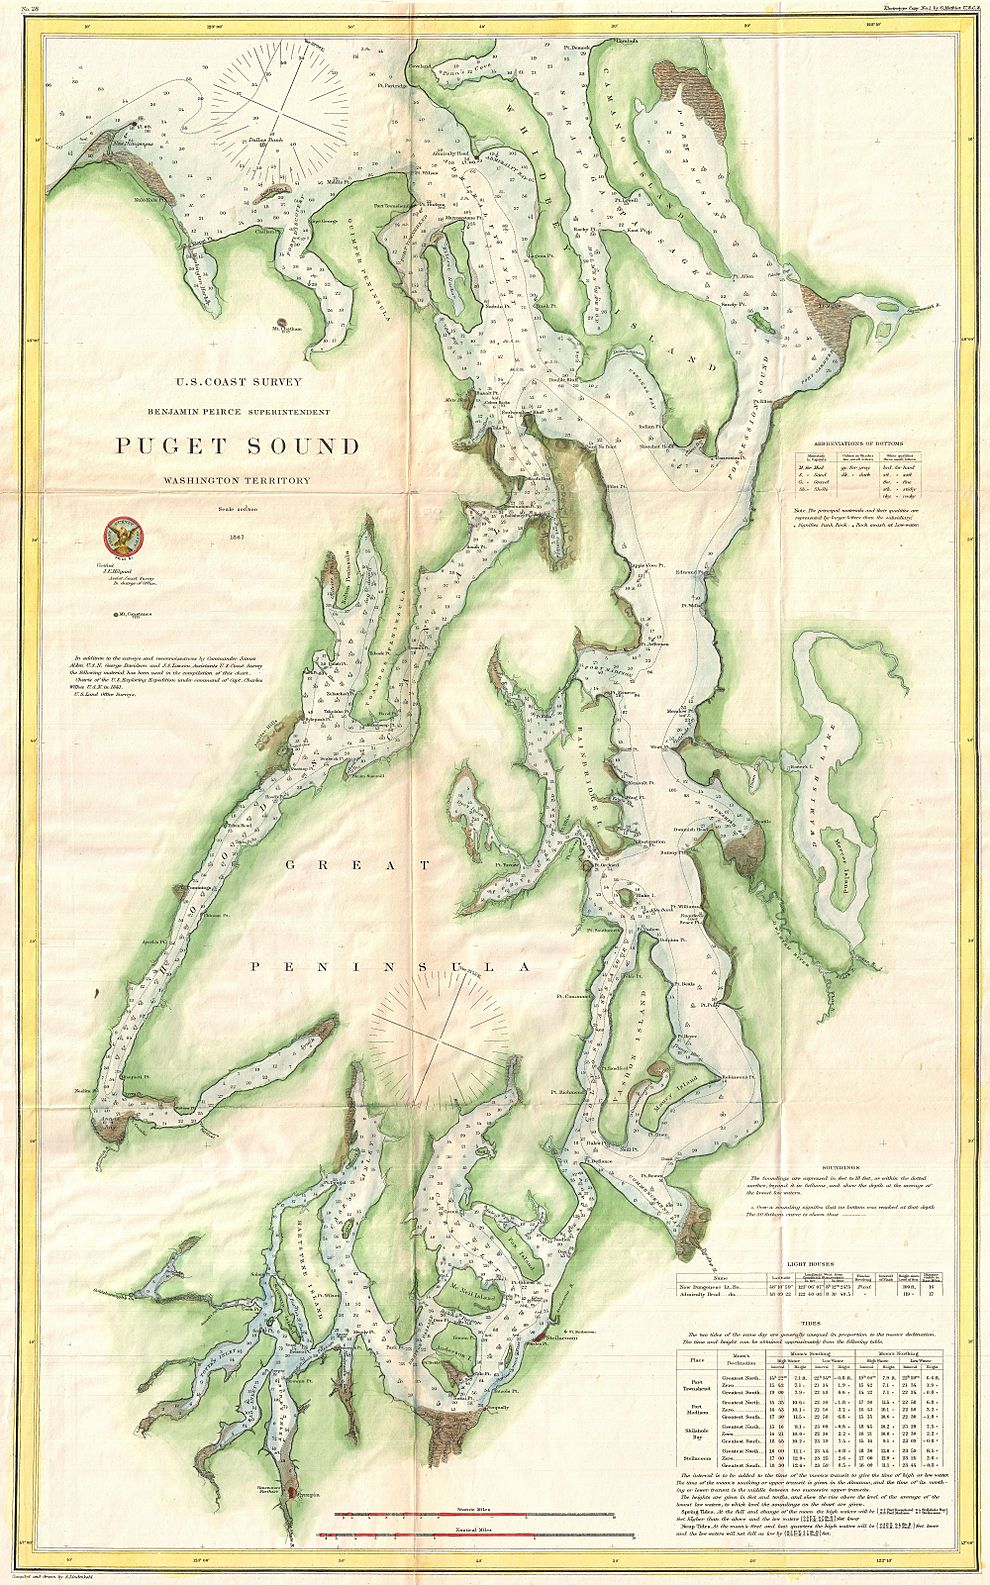 This 1867 U.S. Coast Survey map shows the Kitsap Peninsula, where Hansville is located.